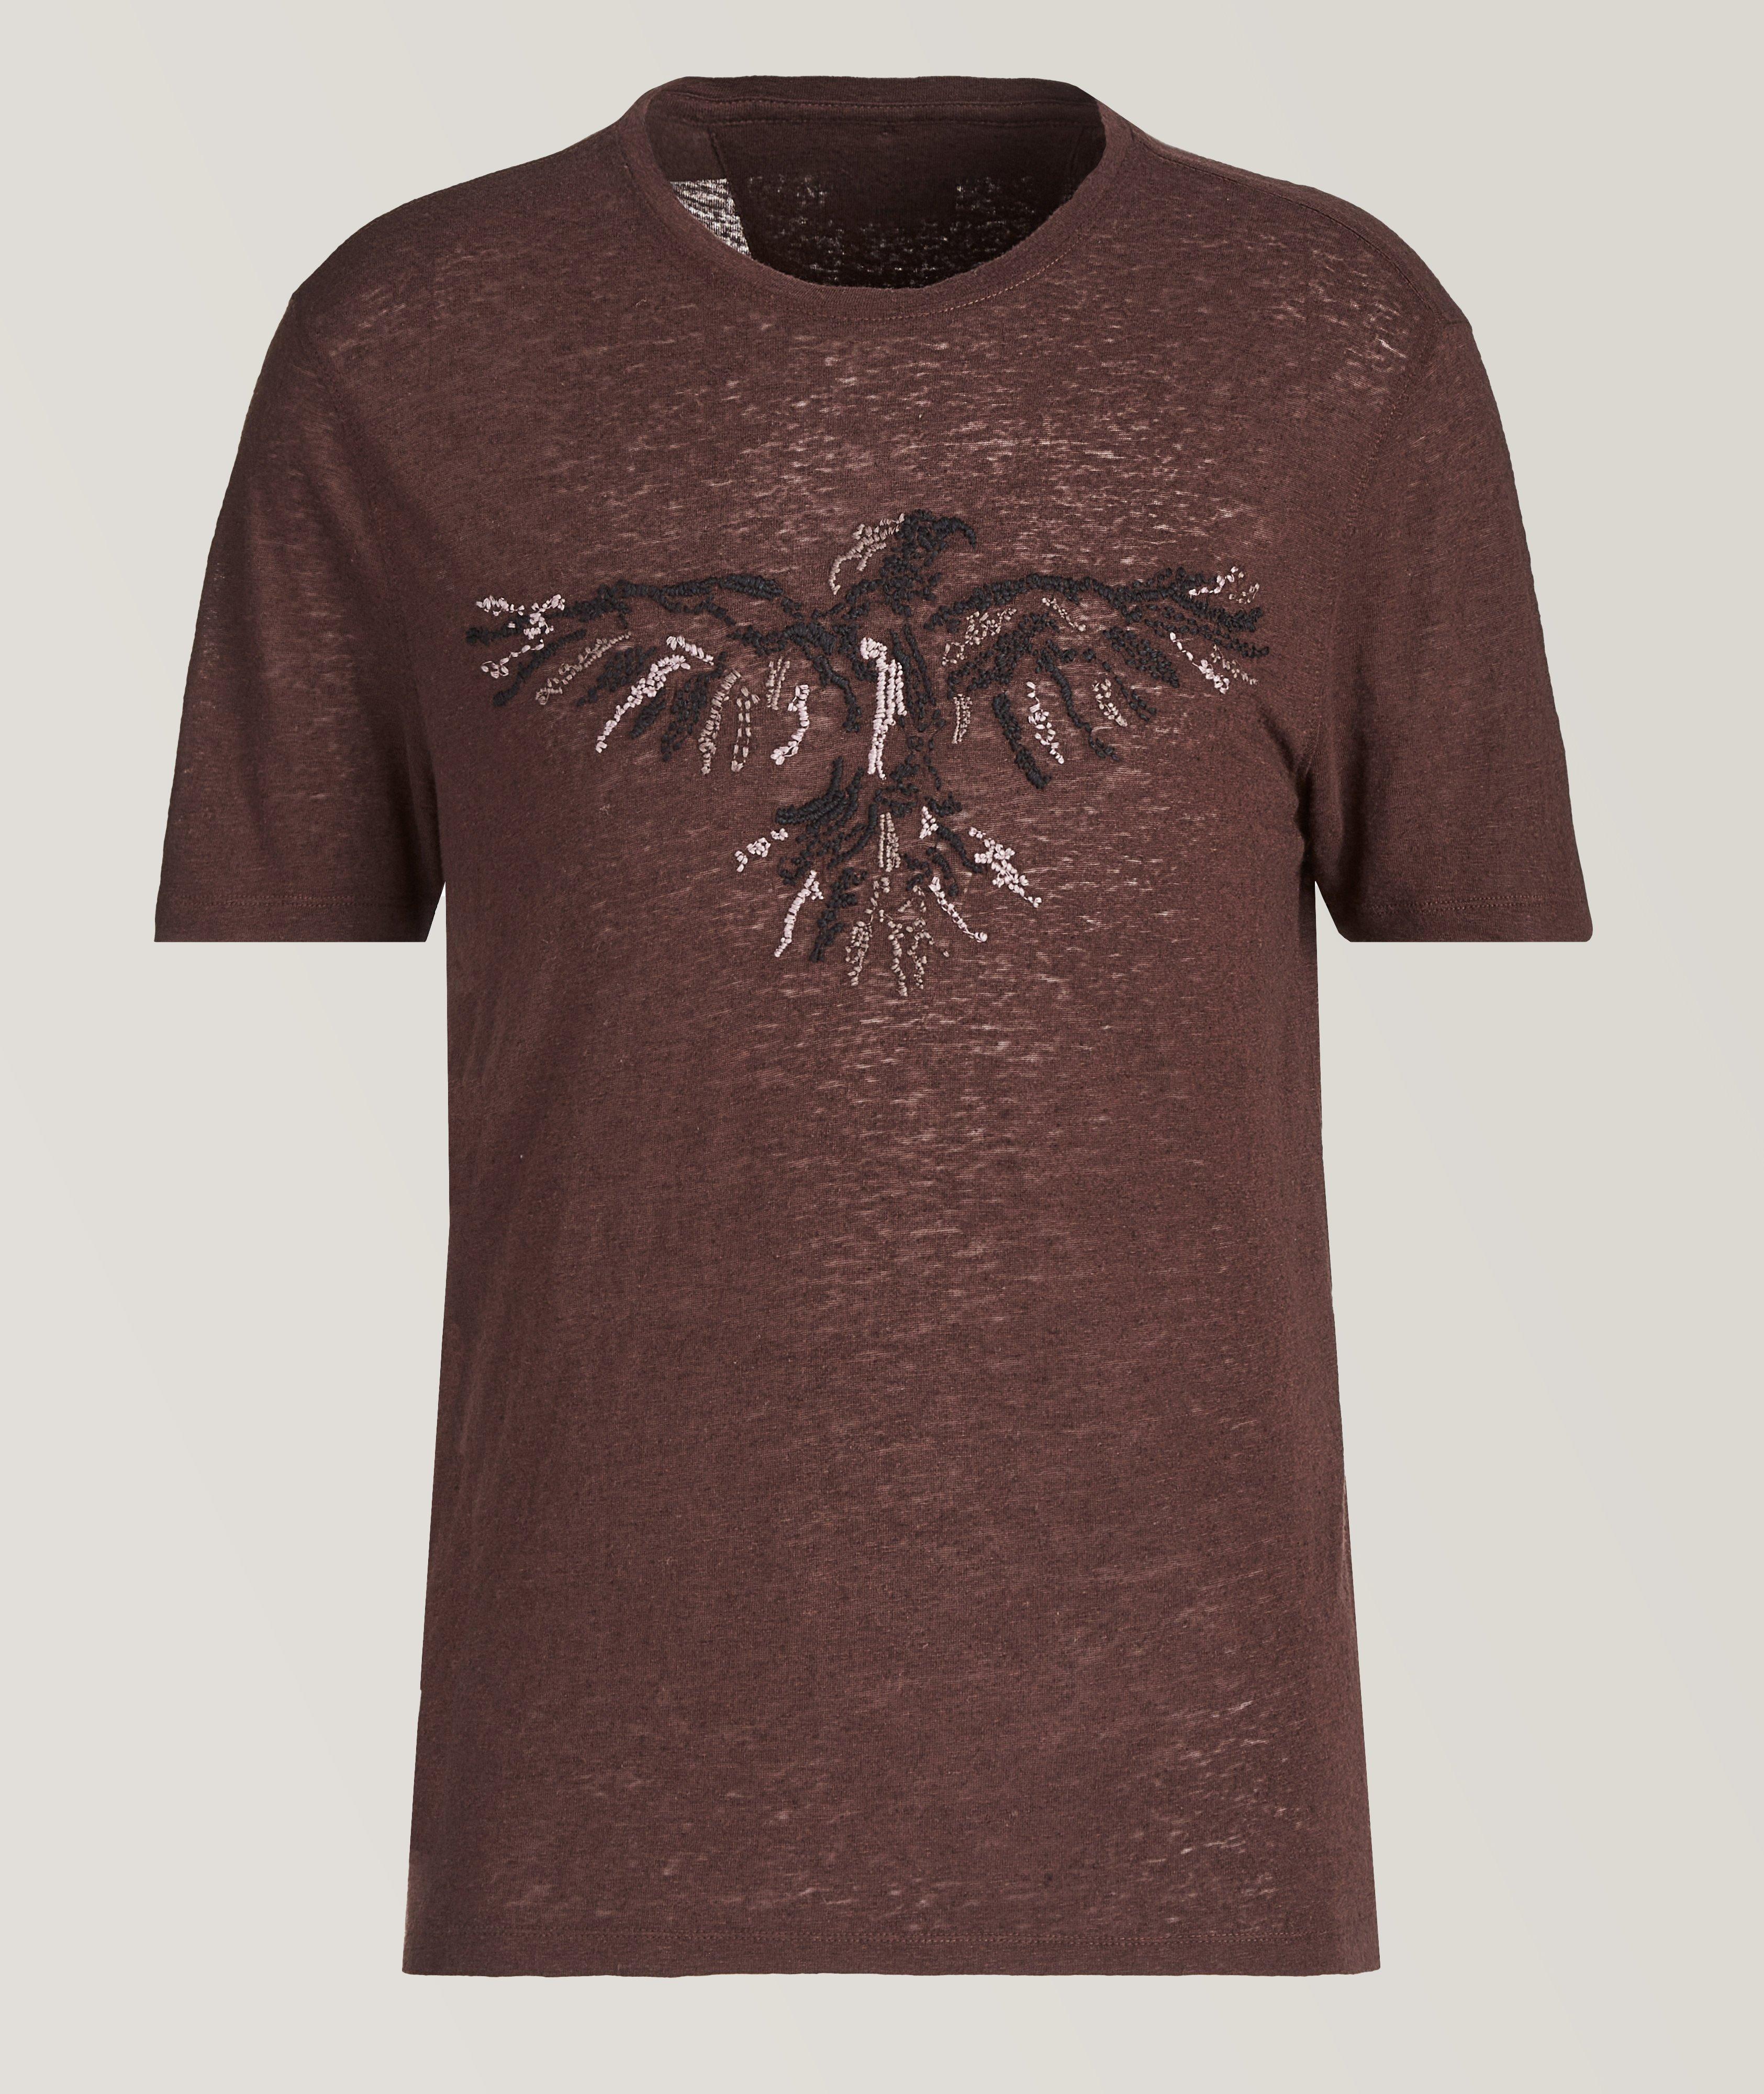 Raven Embroidered Crew Neck T-Shirt image 0